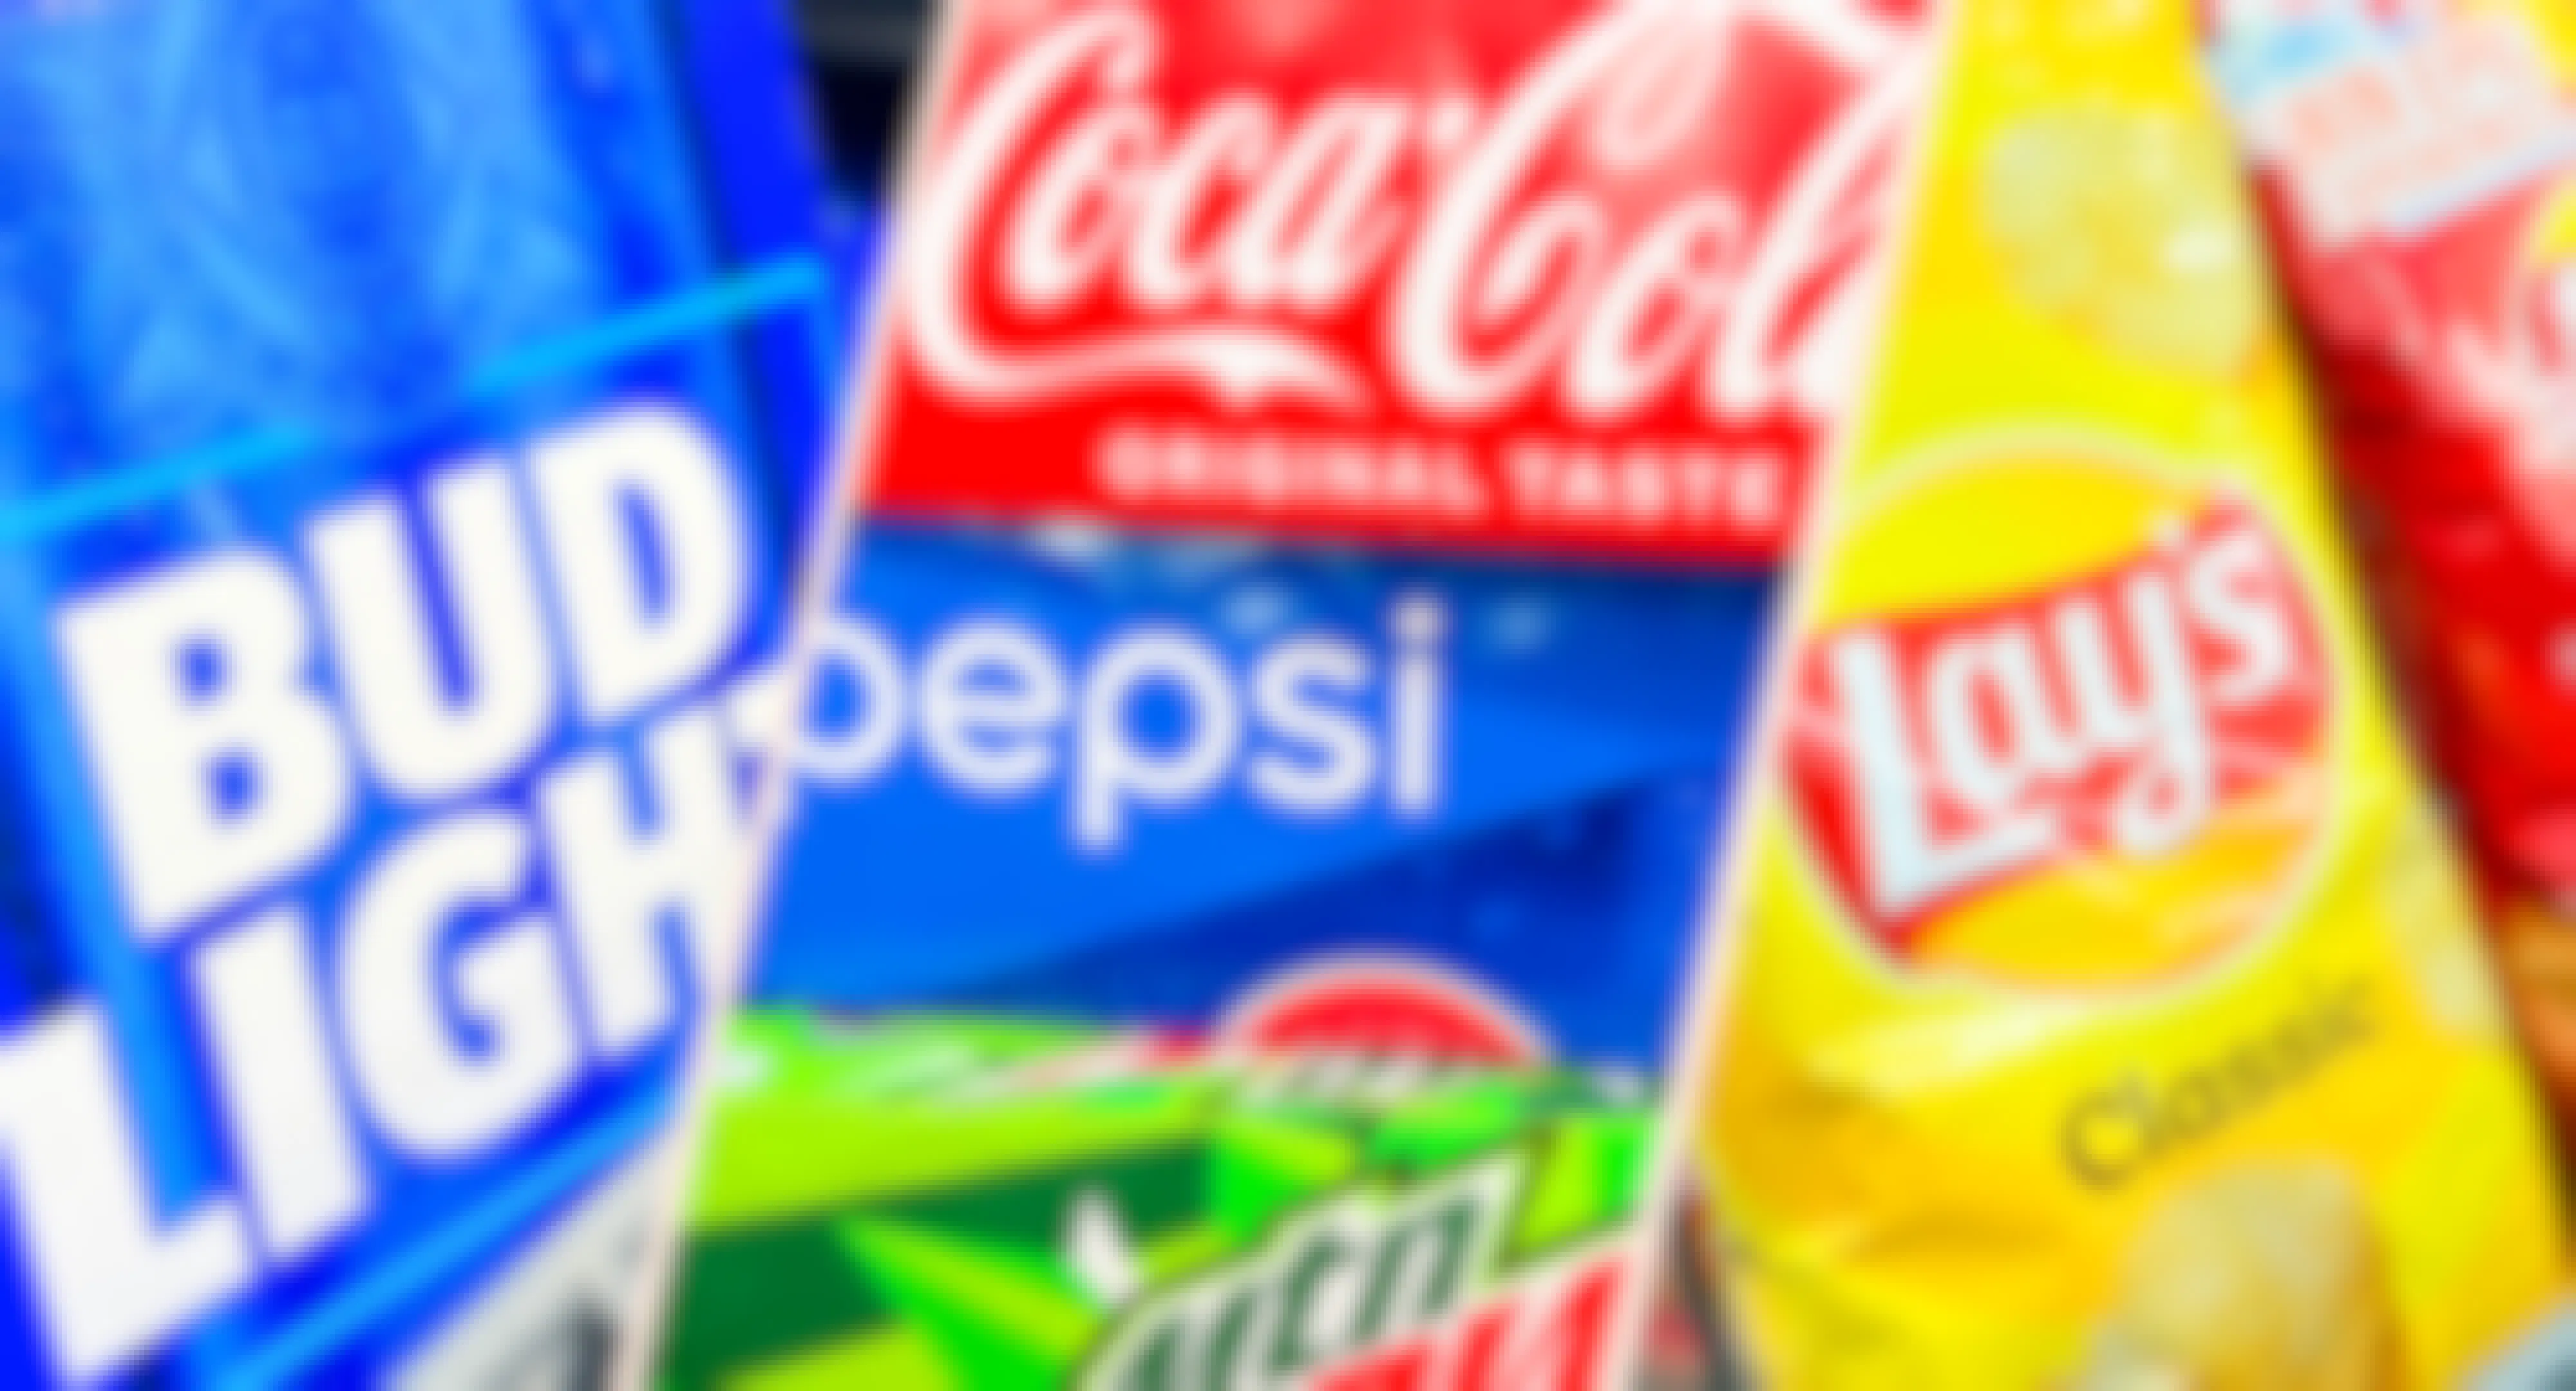 Labor Day Grocery Food Deals: $3 Pepsi 12-Packs, $1.99 Chips, and Free Beer